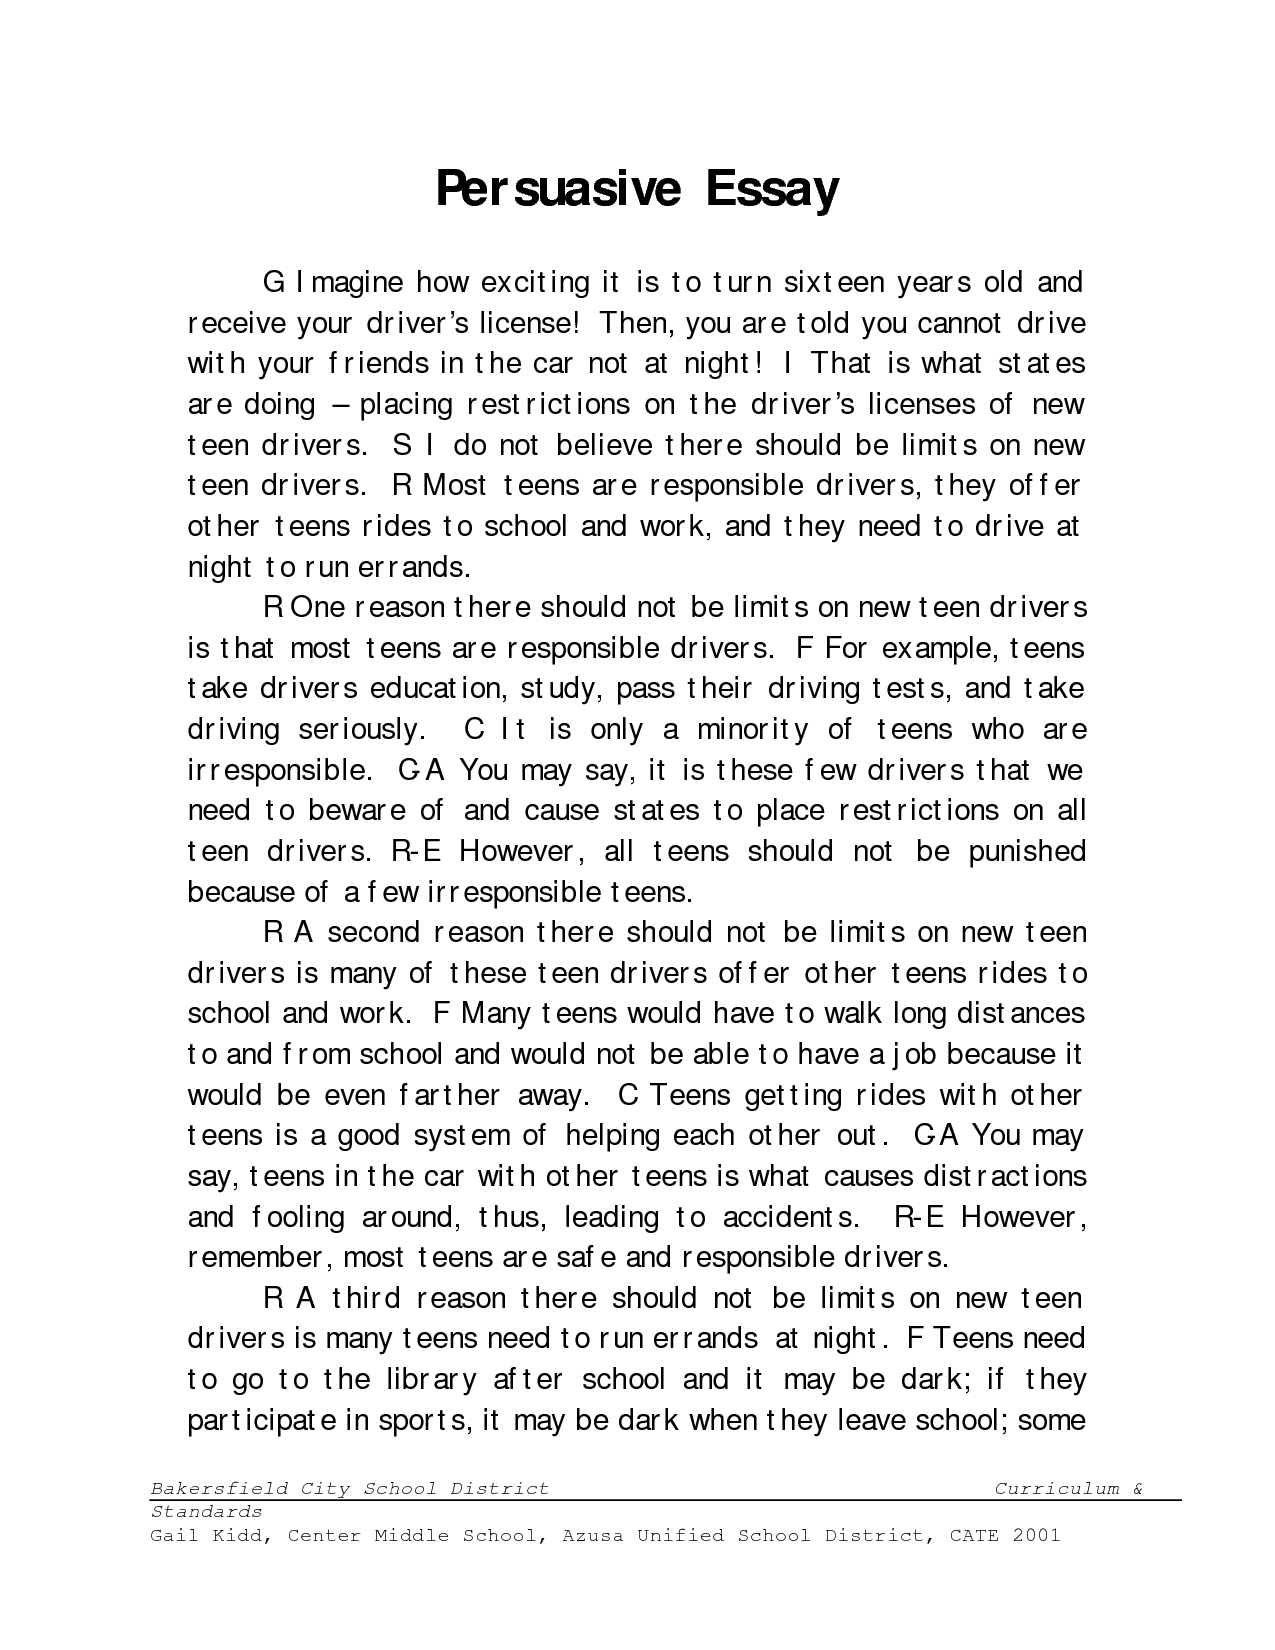 How to write an effective persuasive essay